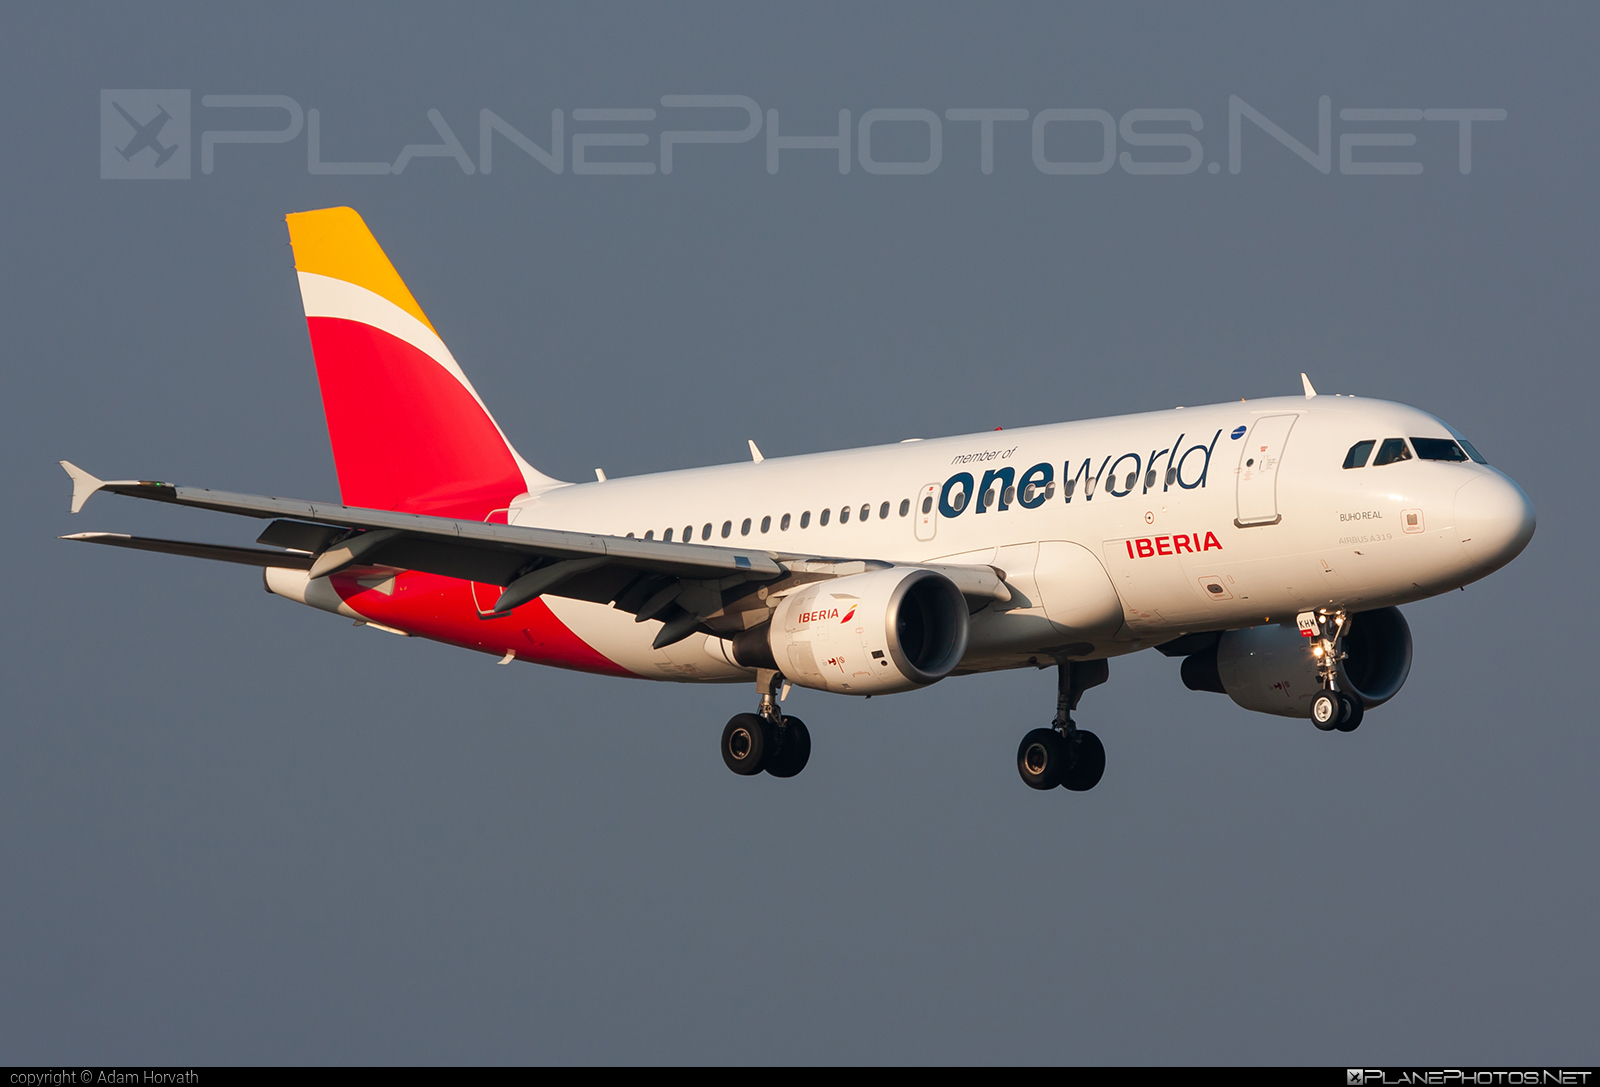 Airbus A319-111 - EC-KHM operated by Iberia #a319 #a320family #airbus #airbus319 #iberia #oneworld